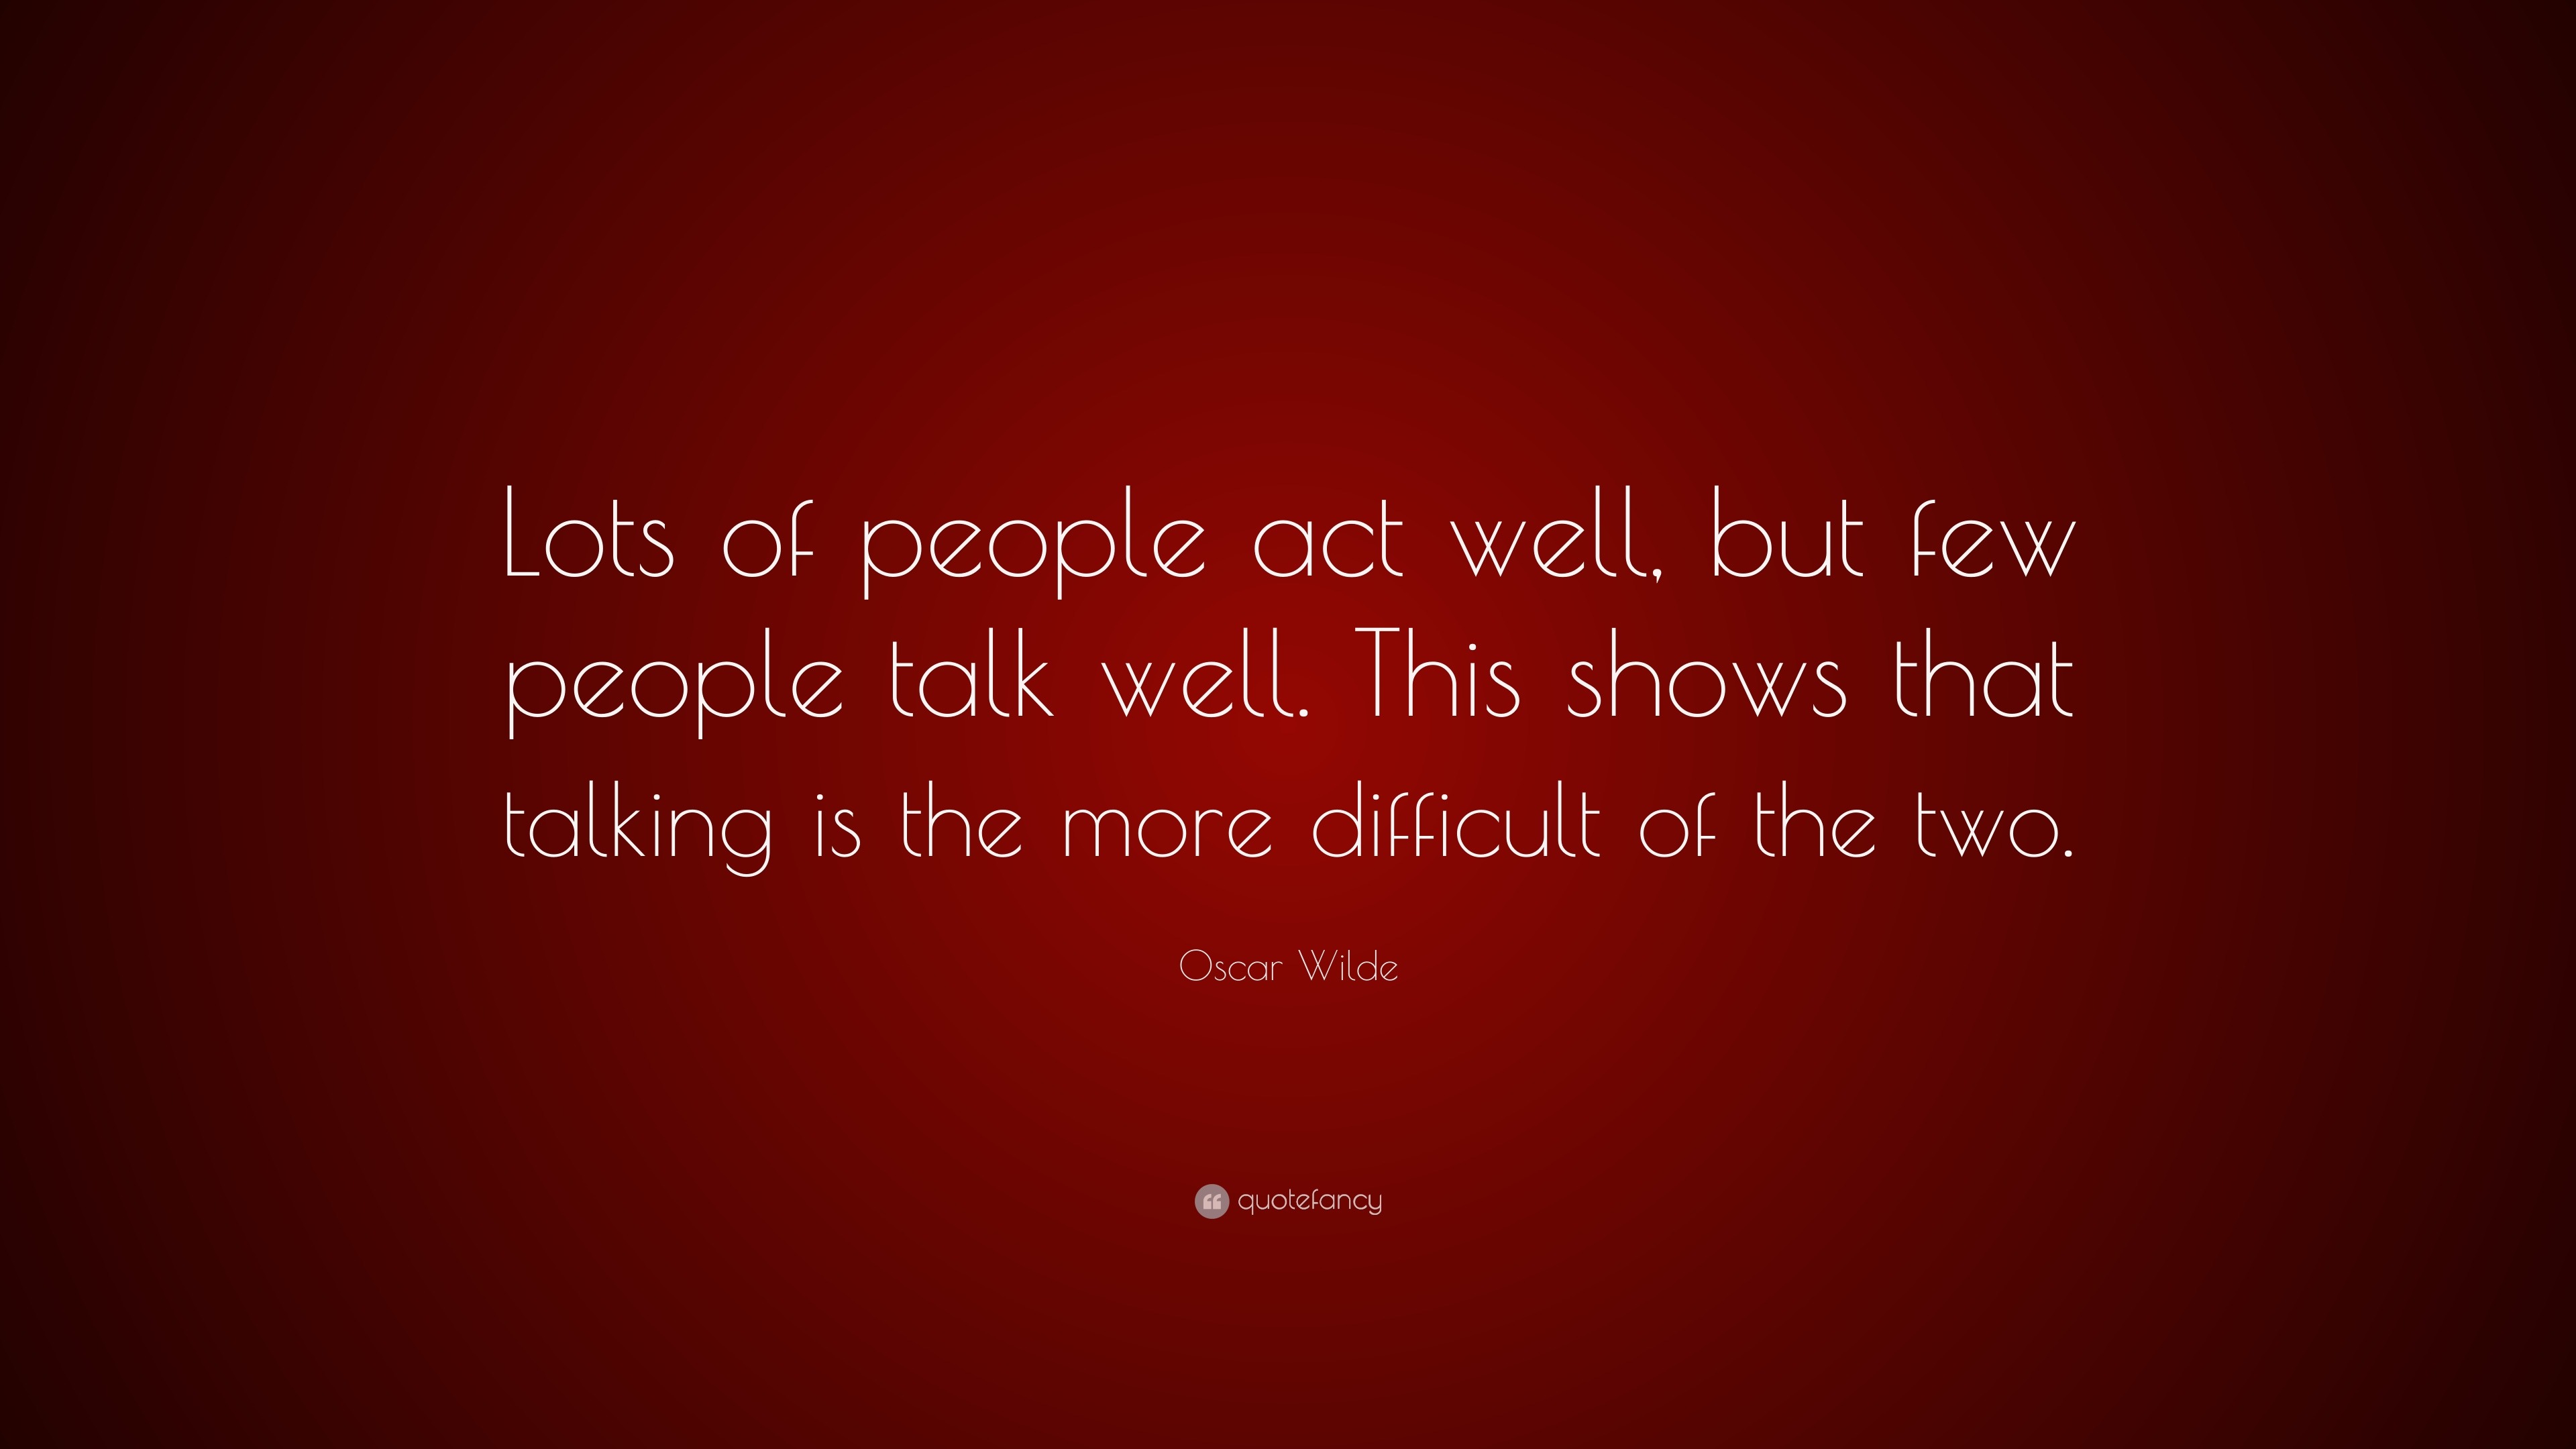 Oscar Wilde Quote: “Lots of people act well, but few people talk well ...